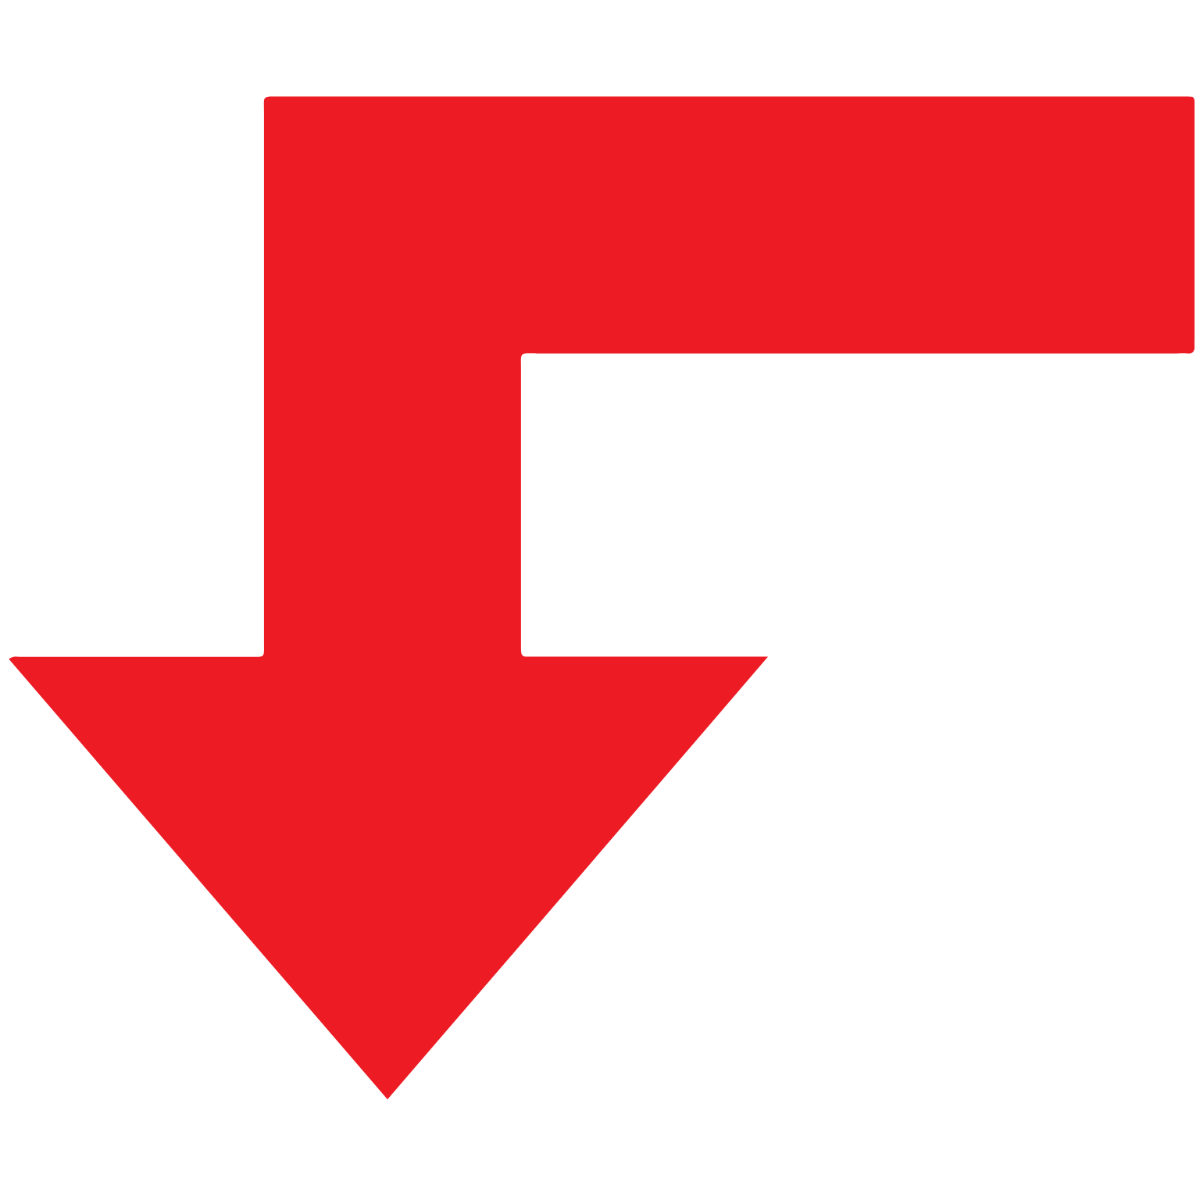 Red Down Arrow